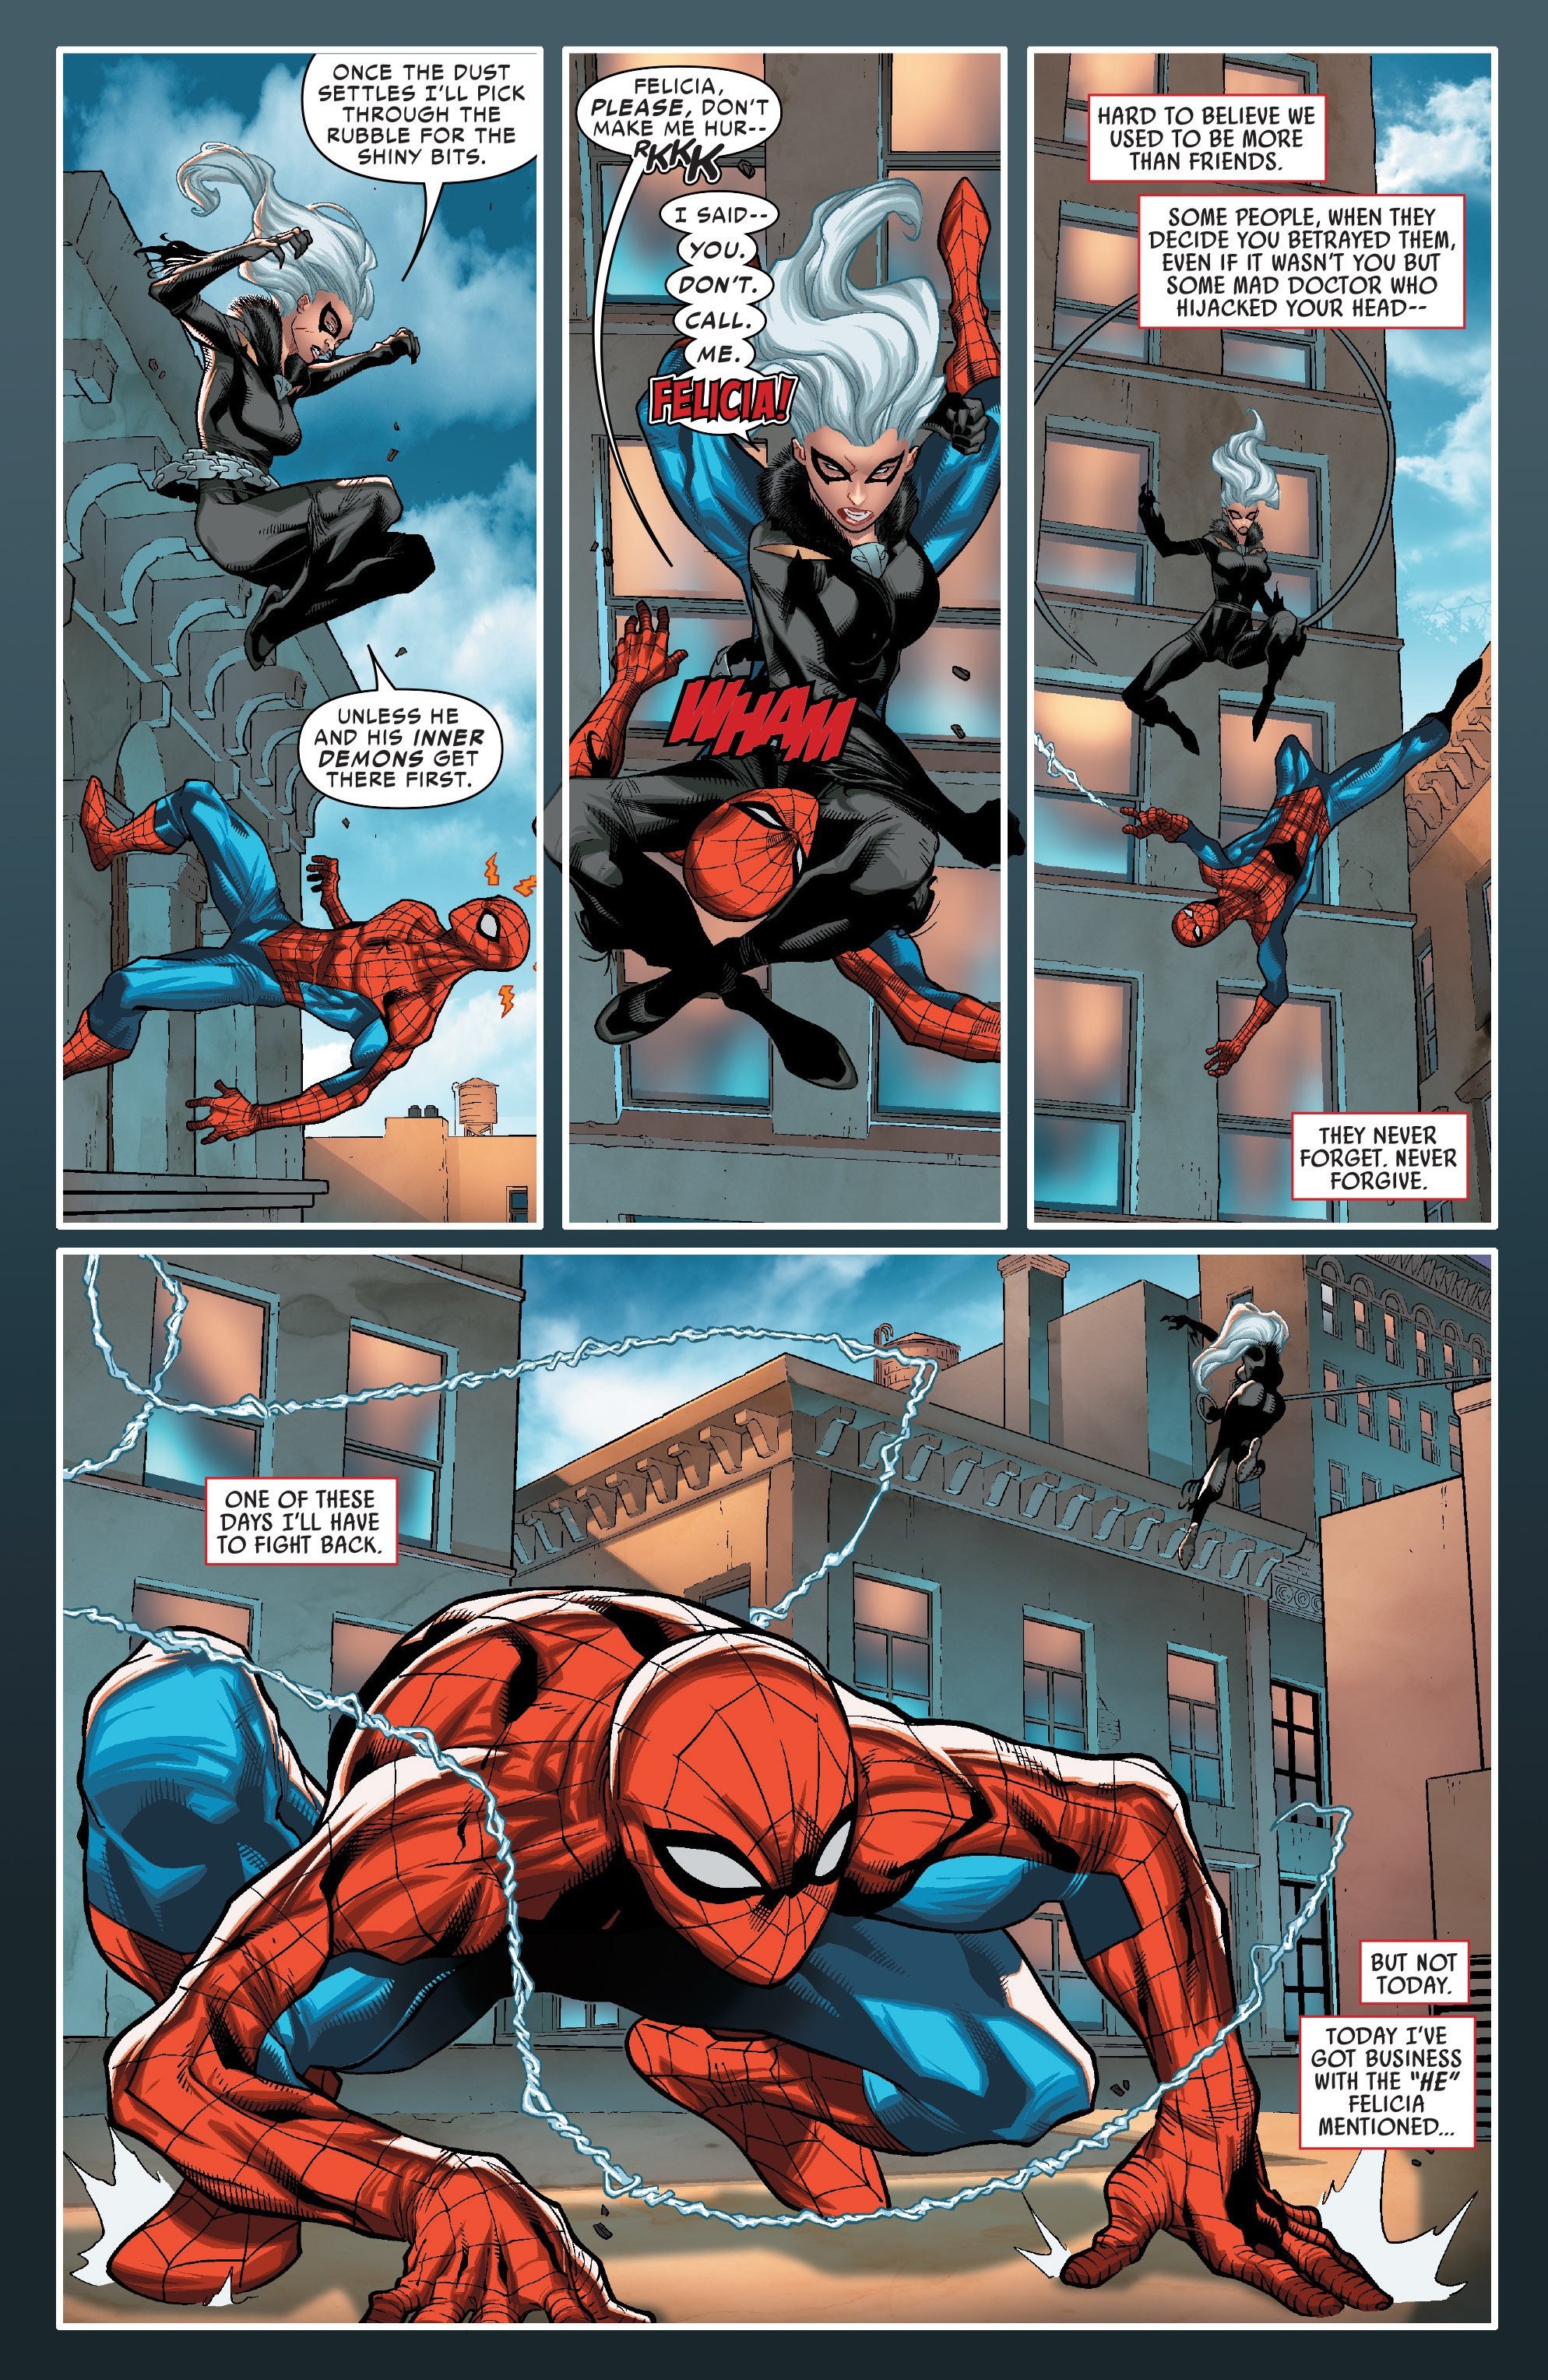 The Amazing Spider-Man (2014) issue 20.1 - Page 8